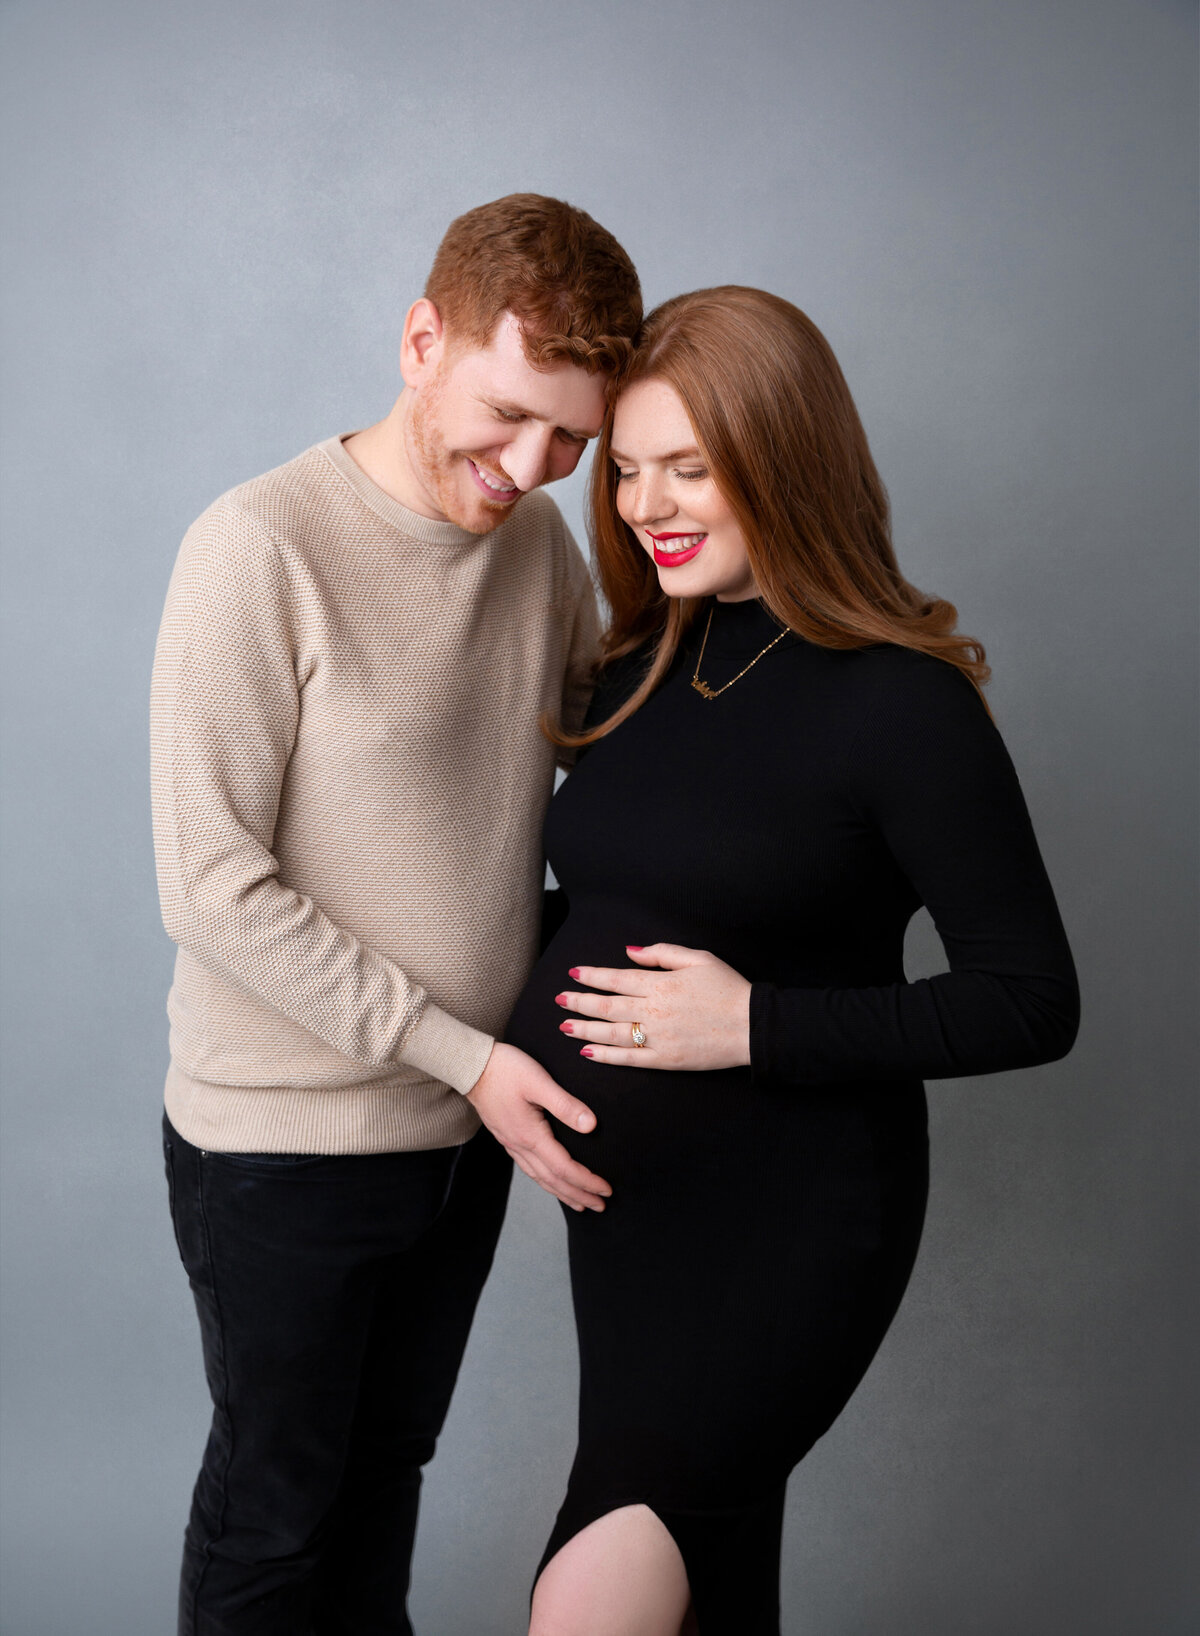 Expectant mom and dad pose for maternity photos in Brooklyn, NY. Mom and dad are standing shoulder-to-shoulder with their heads together and touching the baby bump.